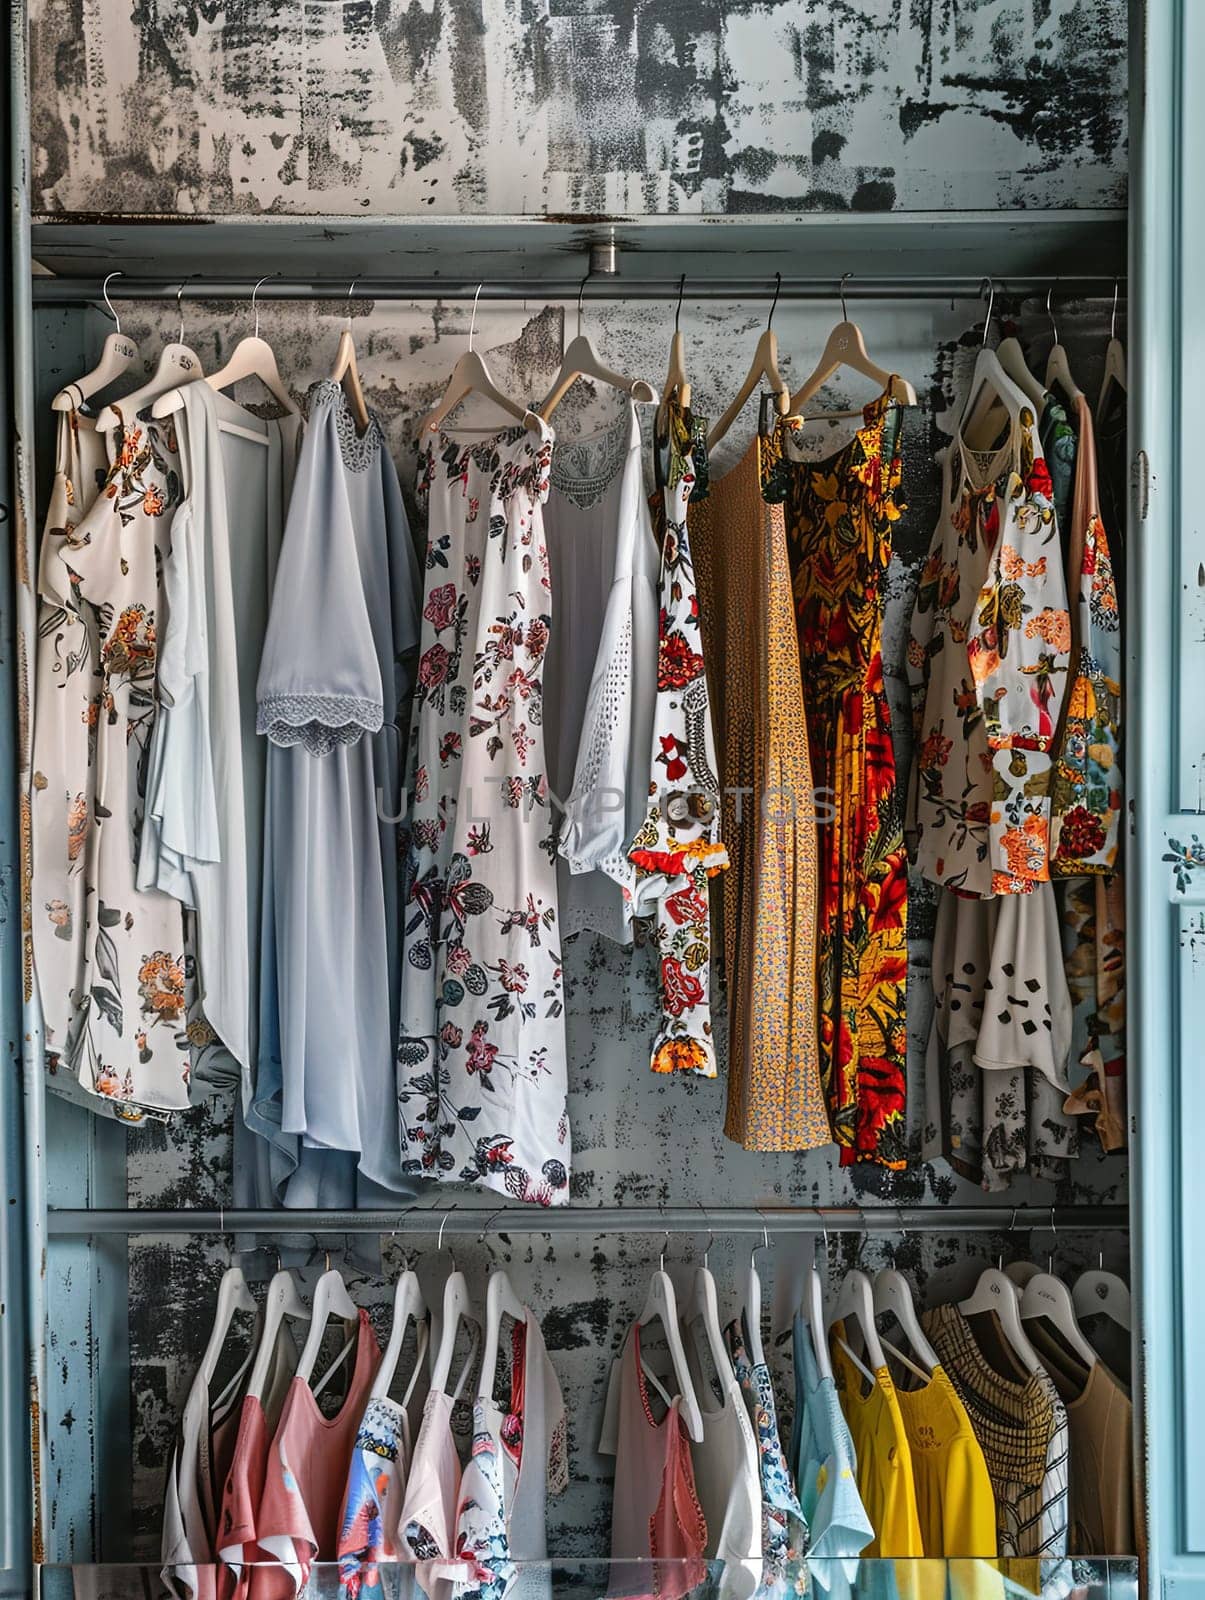 Closet packed with vibrant, summer dresses and shirts on hangers in a fashionable womens clothing showroom.